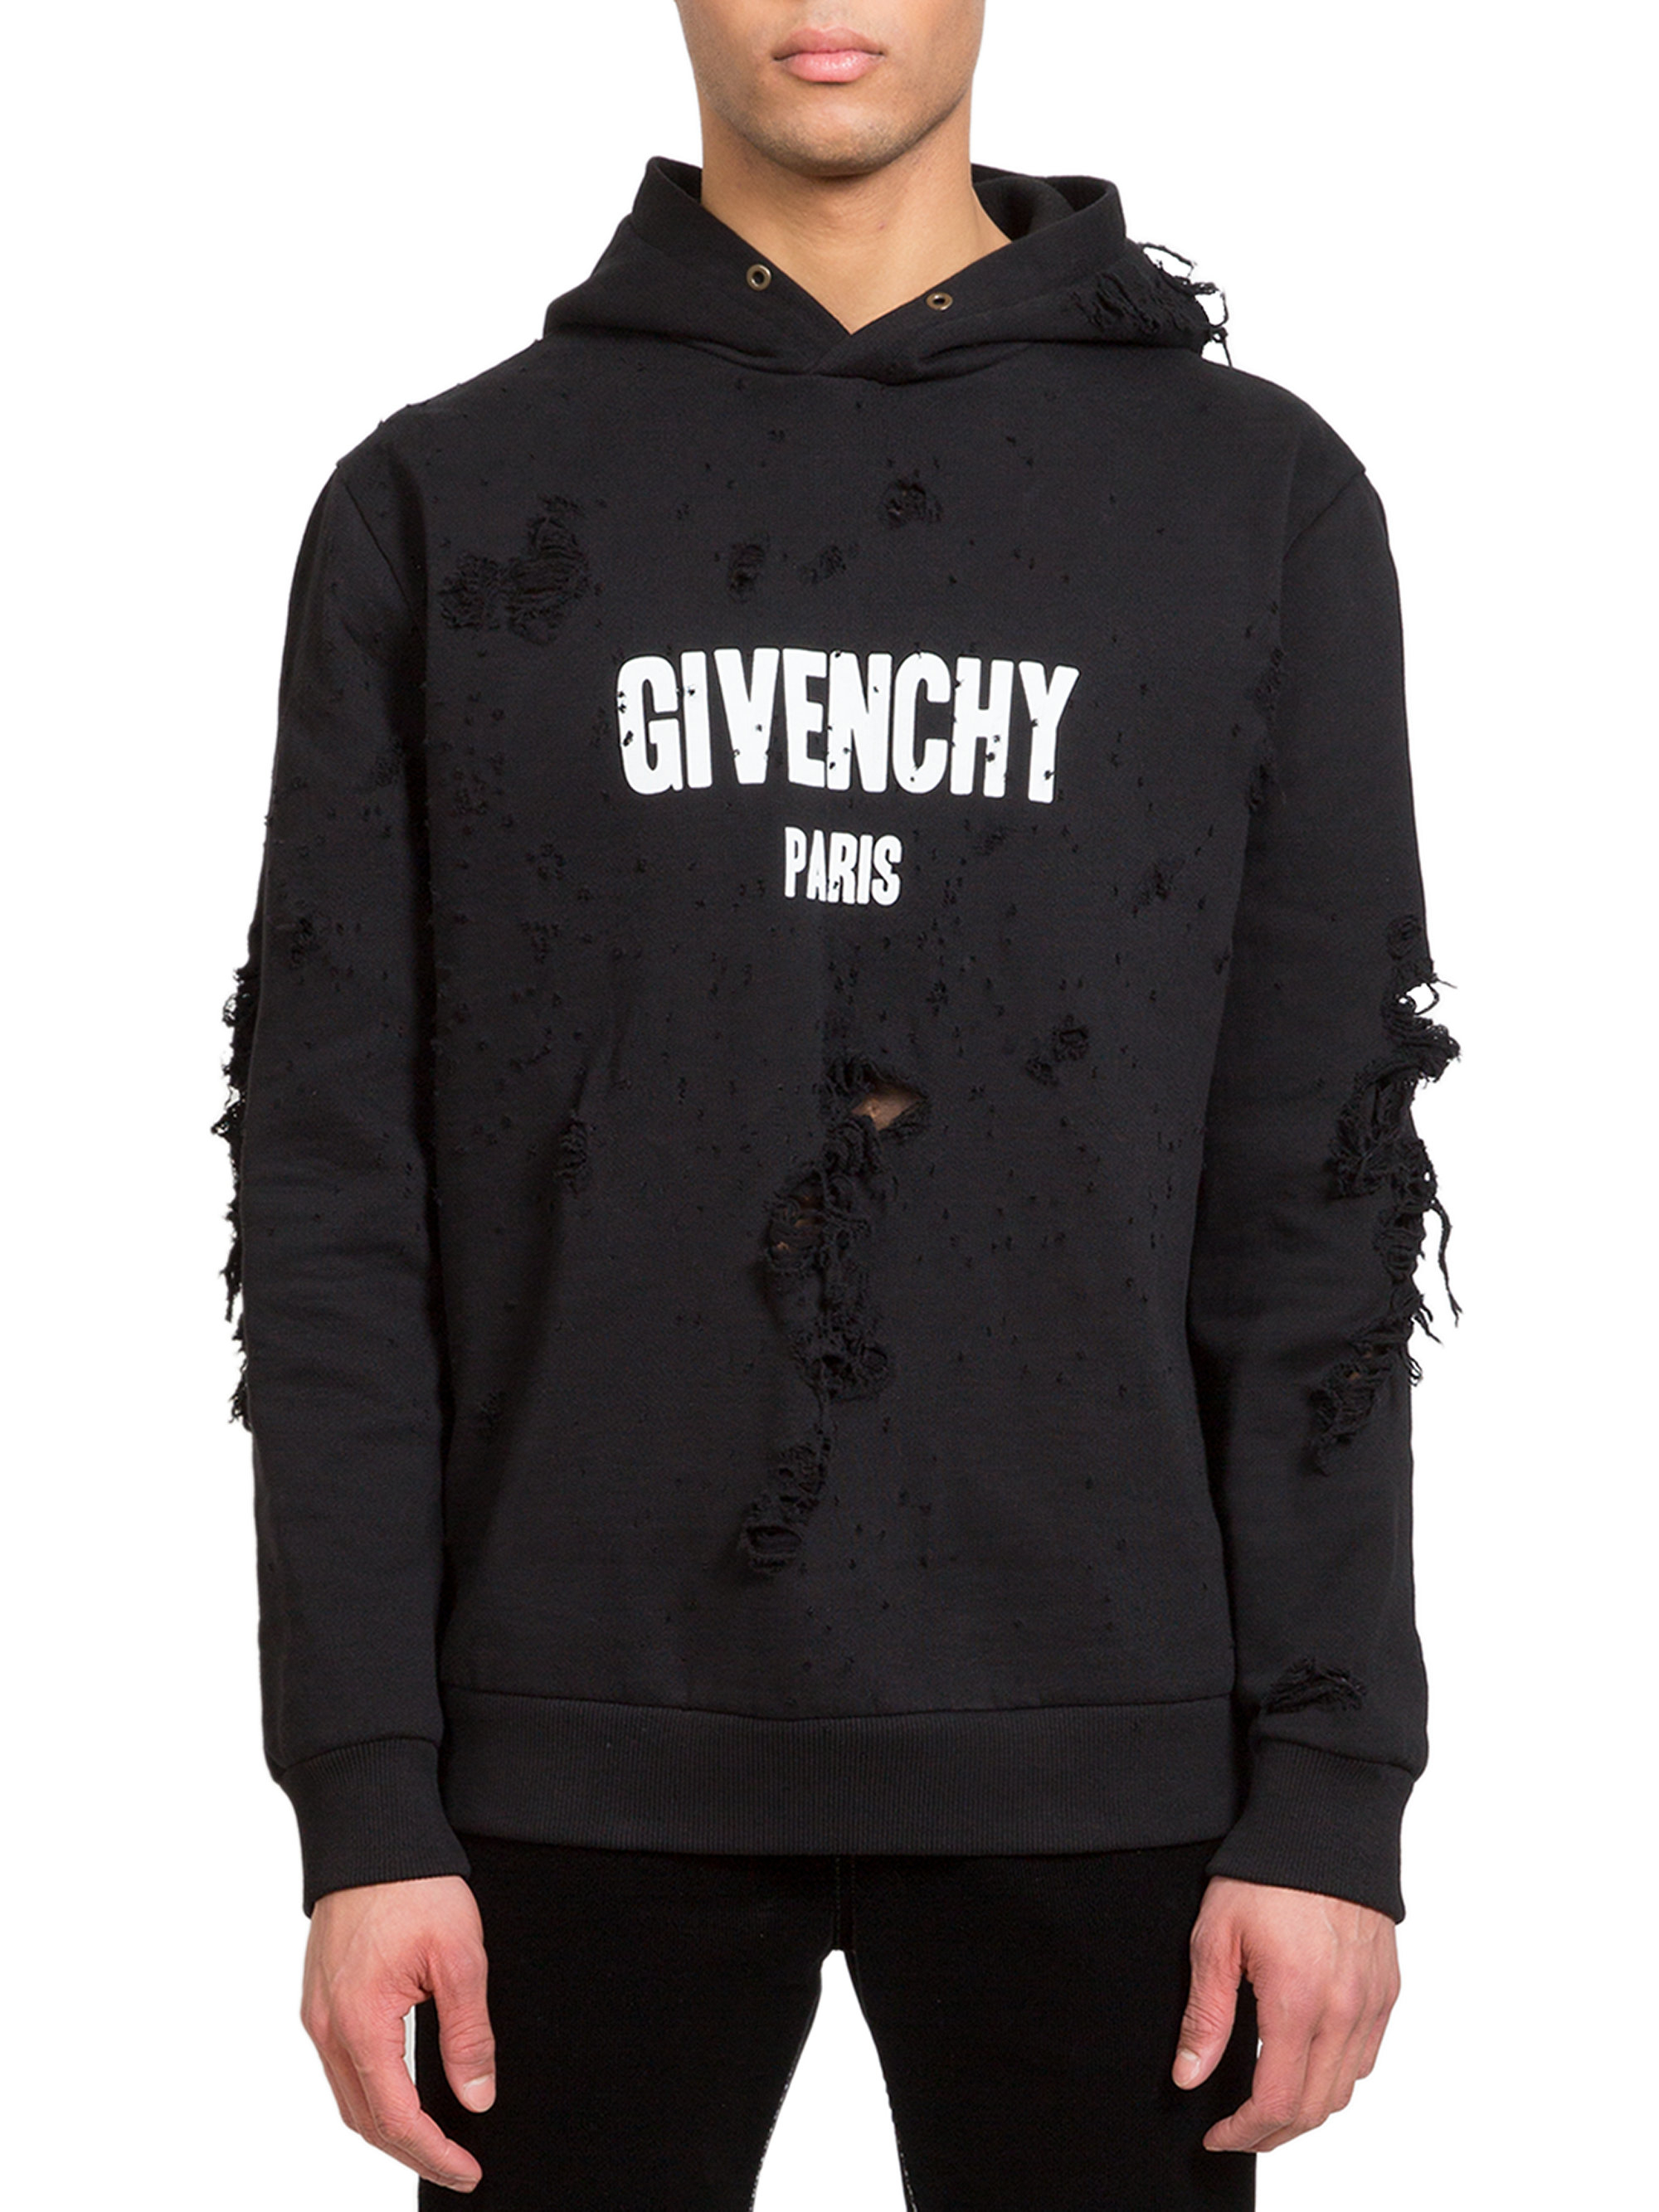 givenchy zip up sweater